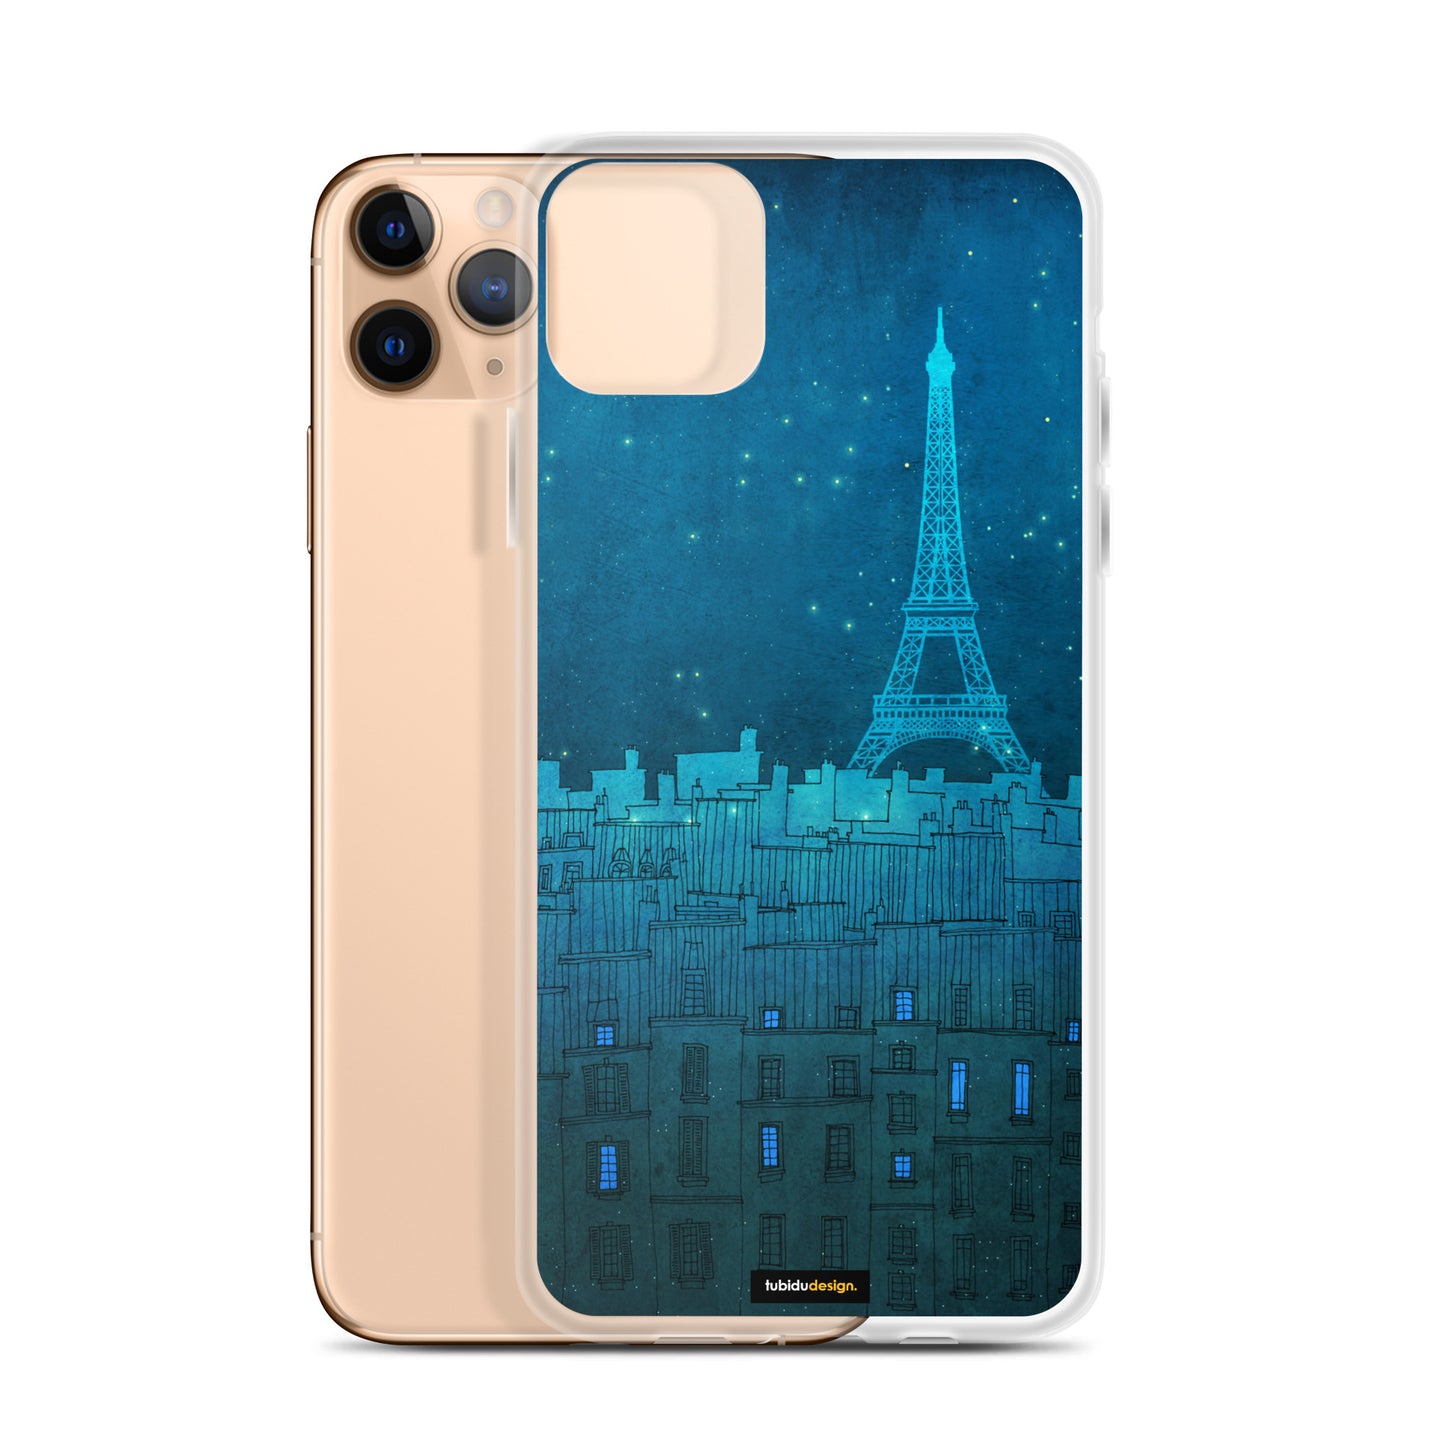 The Eiffel tower in Paris - Illustrated iPhone Case